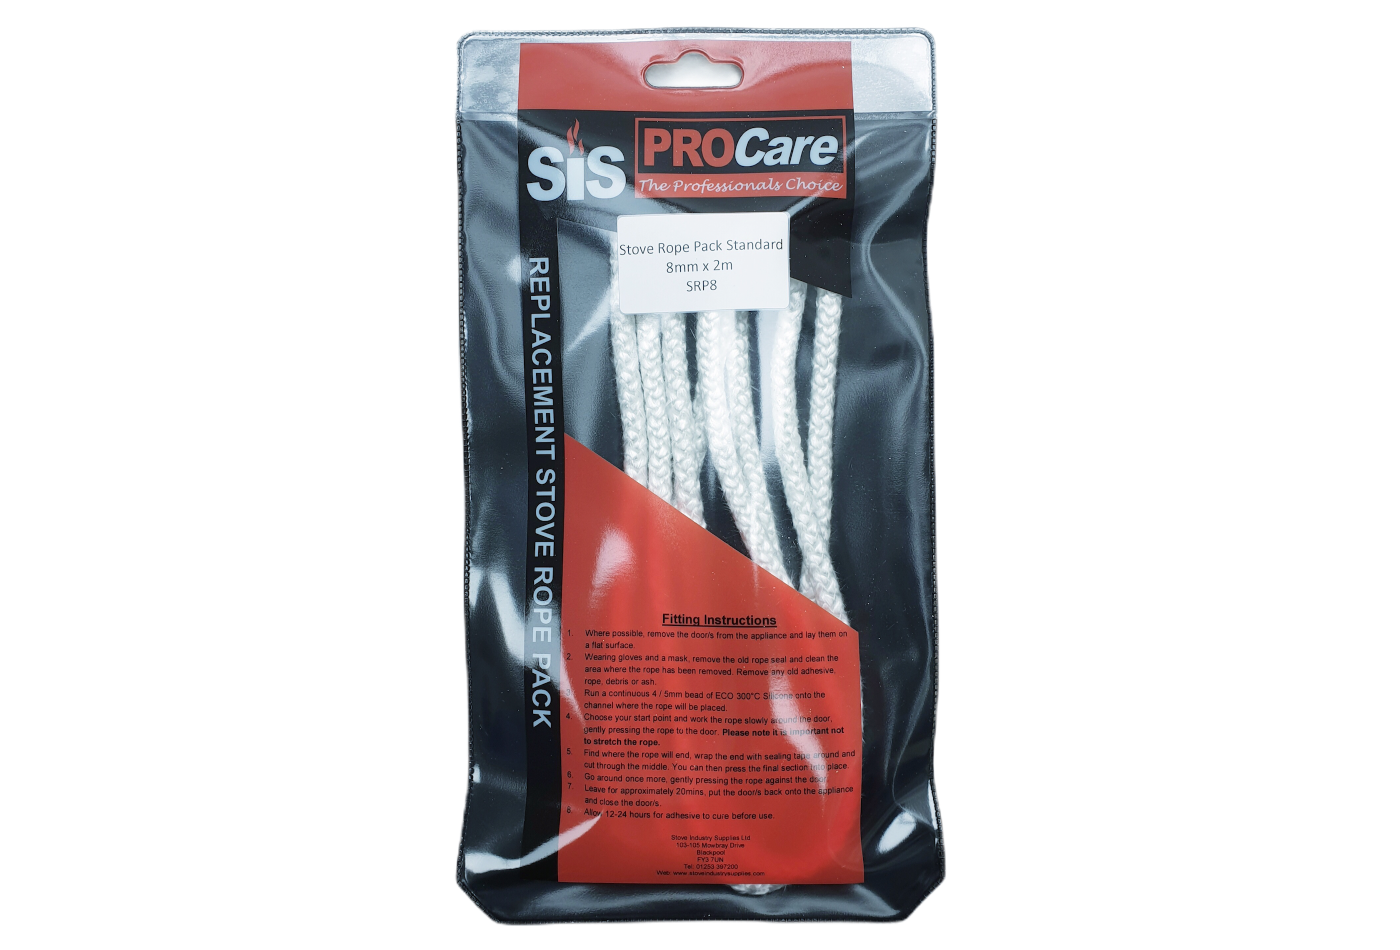 SiS Procare White 8 milimetre x 2 metre Standard Stove Rope Pack - product code SRP8